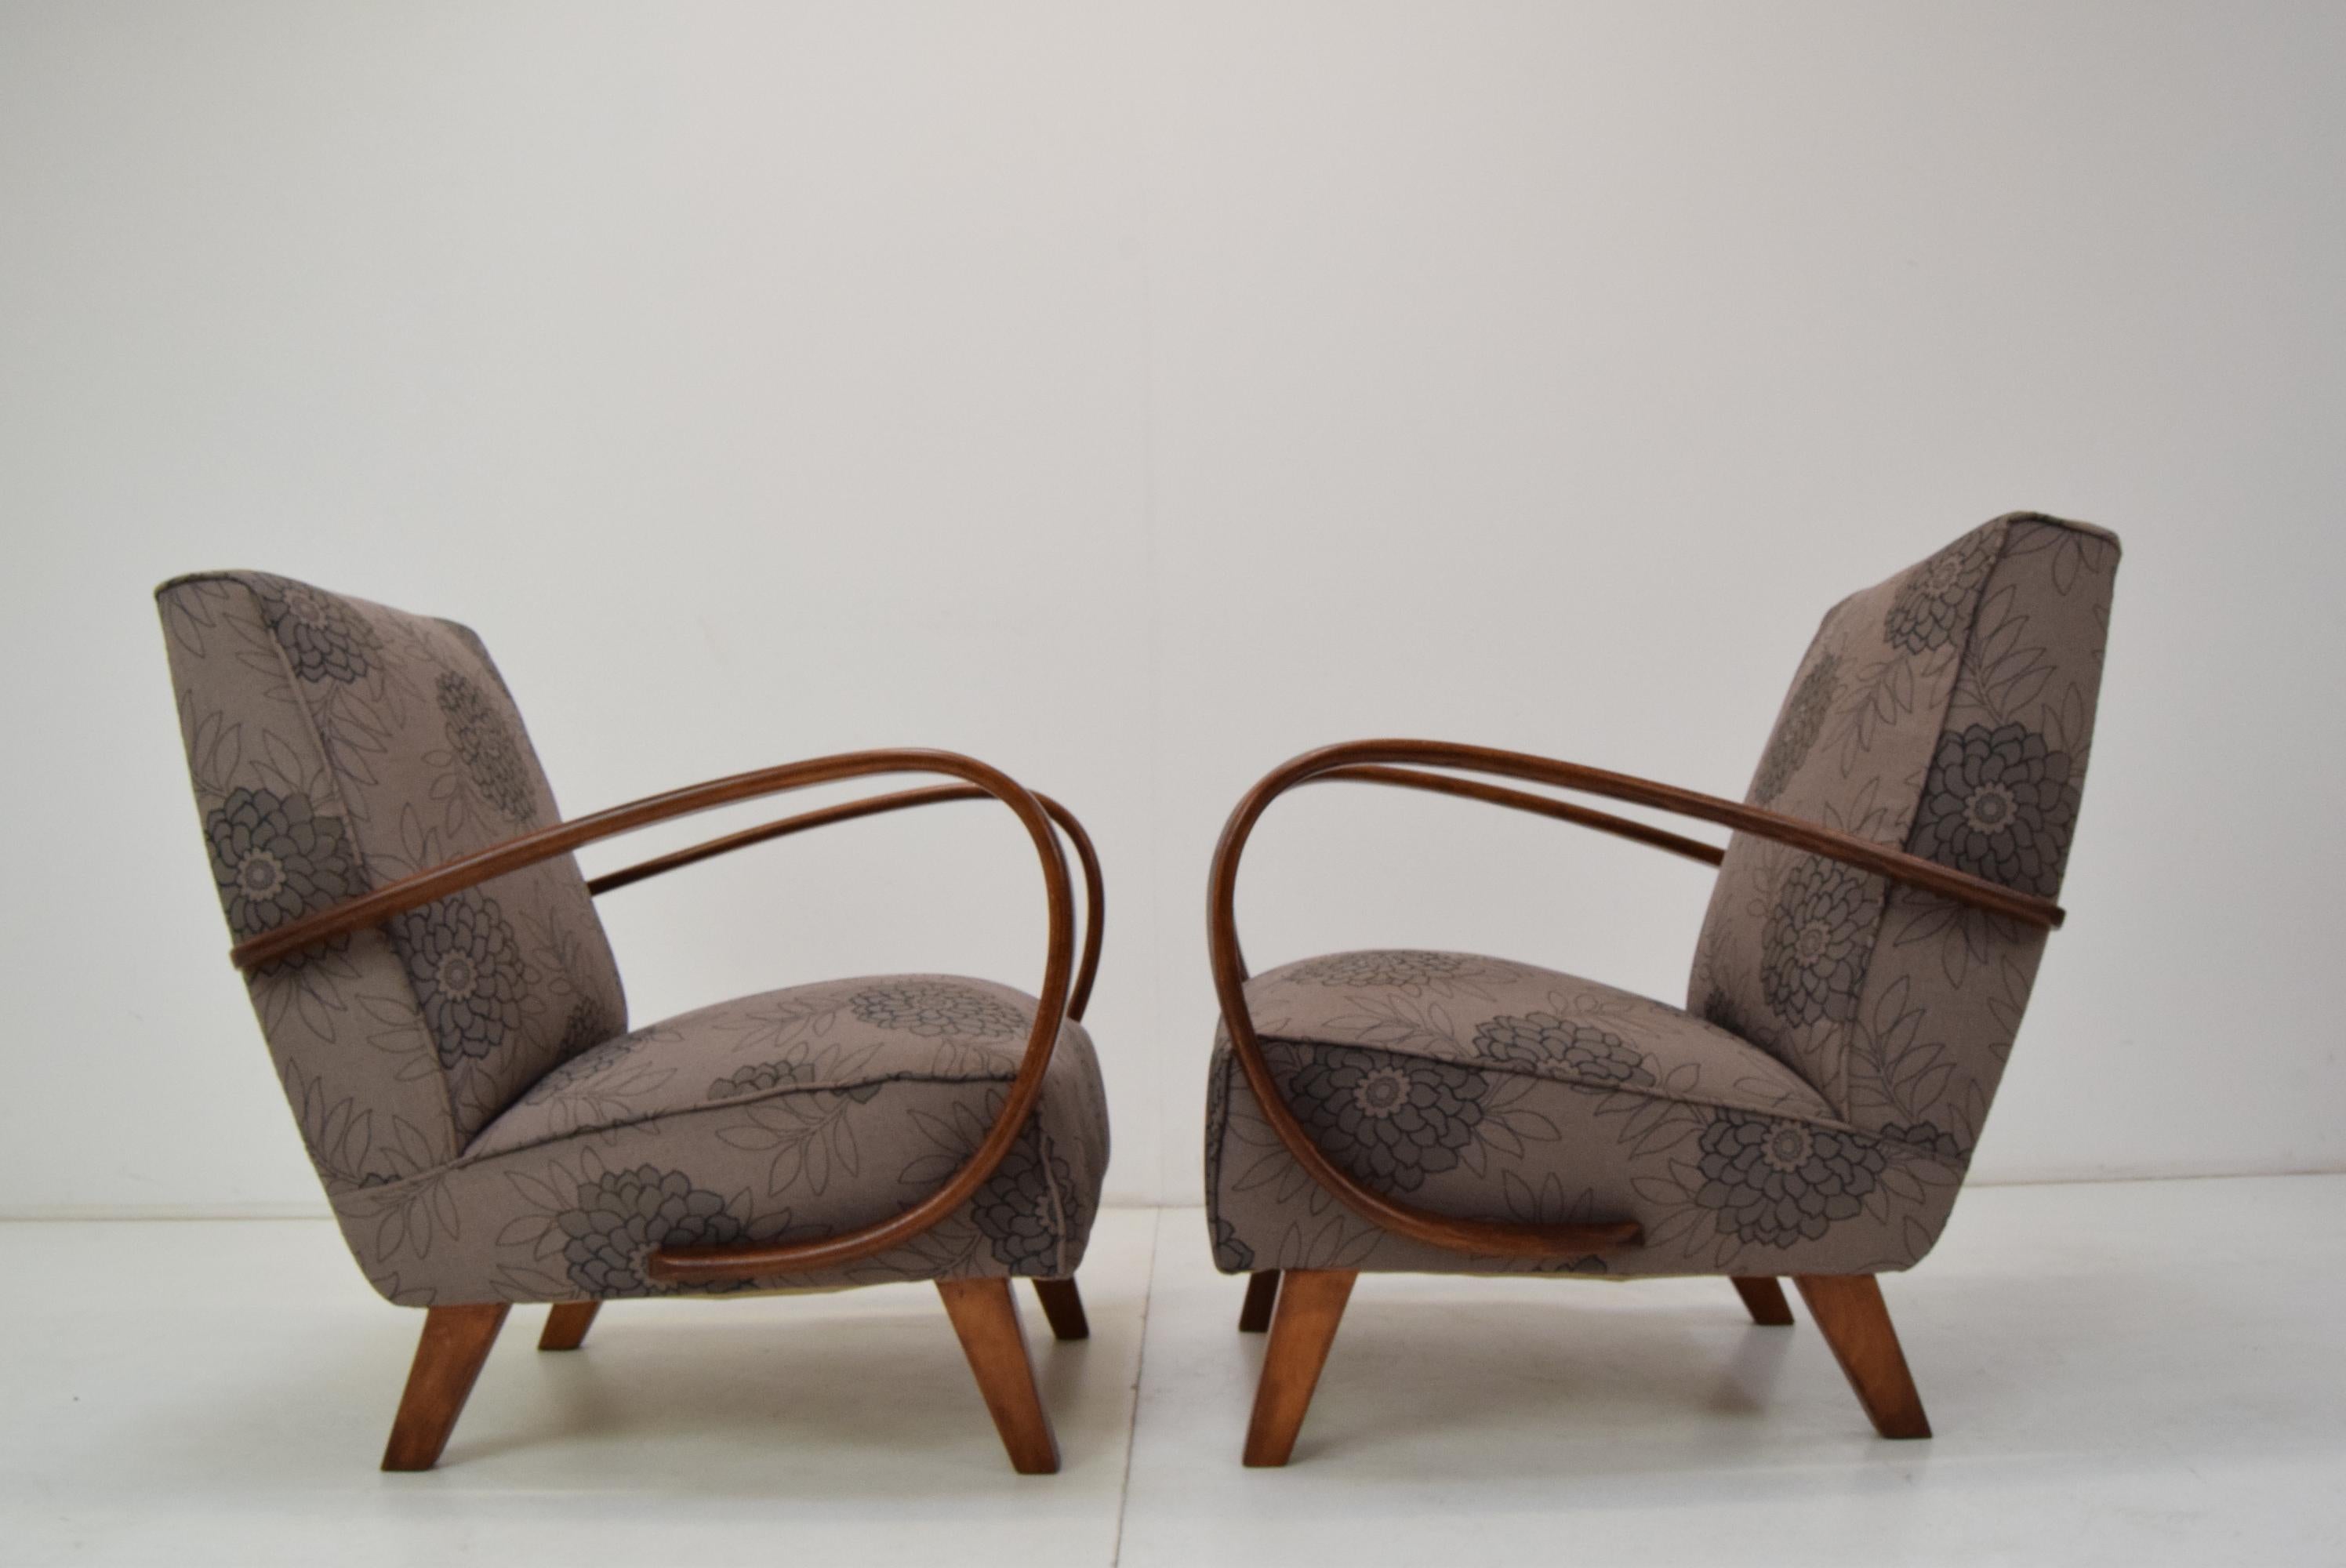 Fabric Pair of Armchairs by Jindrich Halabala, 1950's For Sale